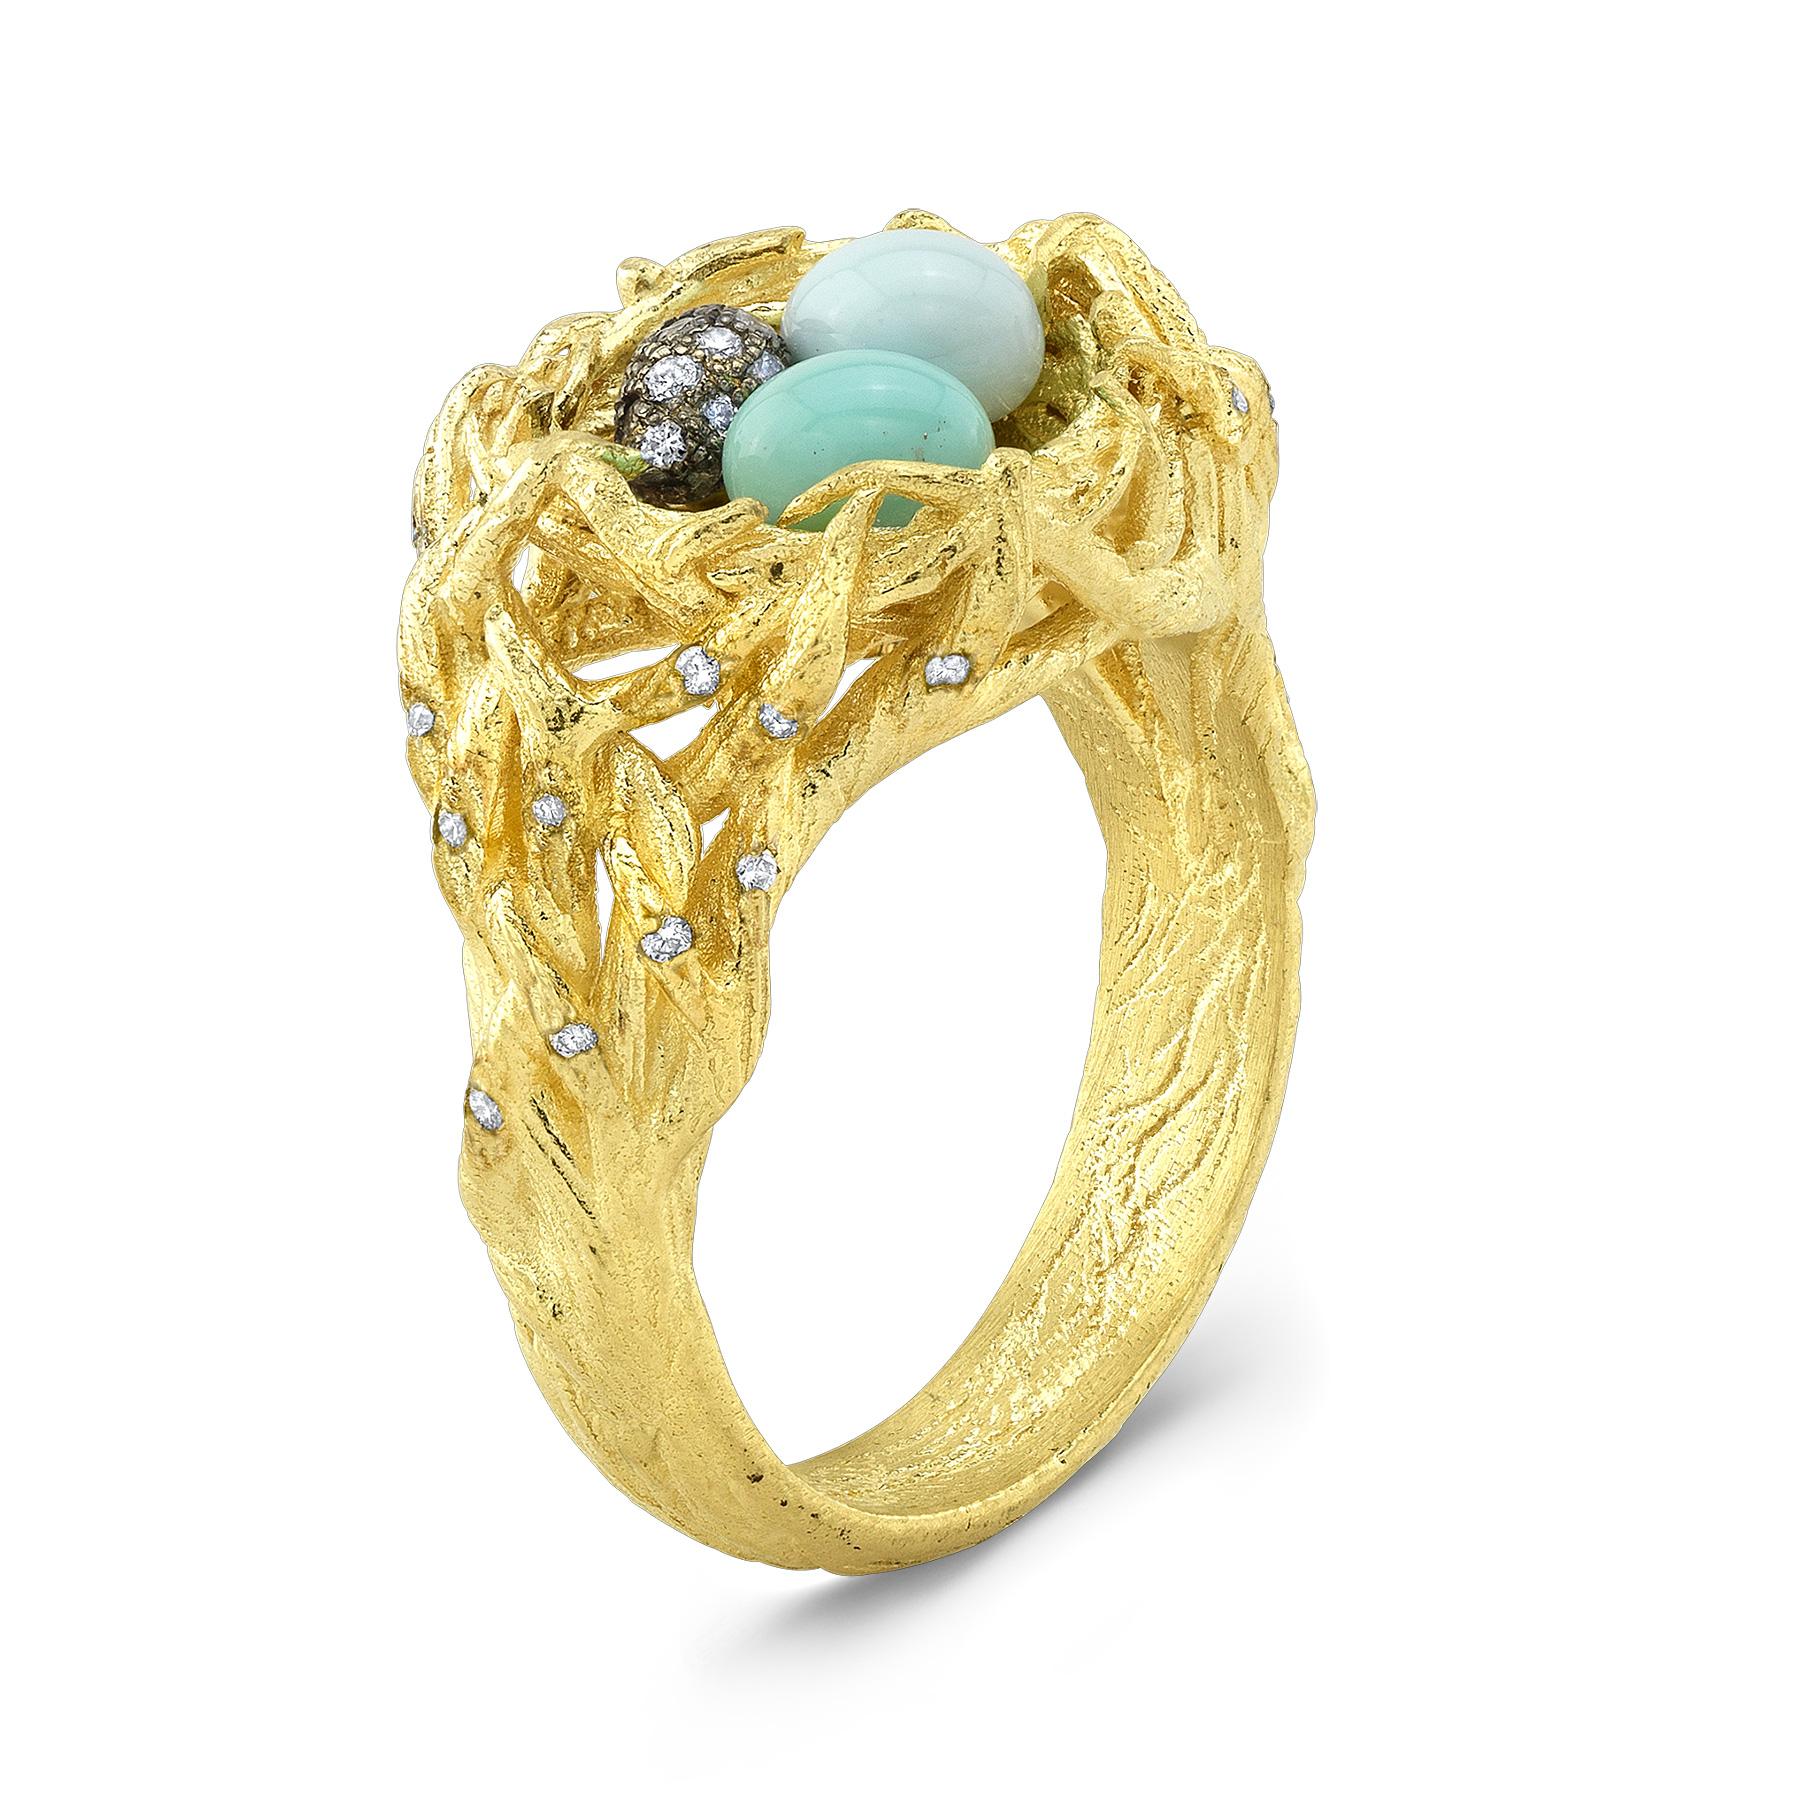 Amy Y's 18K gold, diamond, and enamel Robin's Bird Nest Ring is a classic one-of-a-kind jewel.  Finding new ways to capture the wonders of the natural world of wild animals, Amy has worked to design an exquisite nest recreated in carved gold,